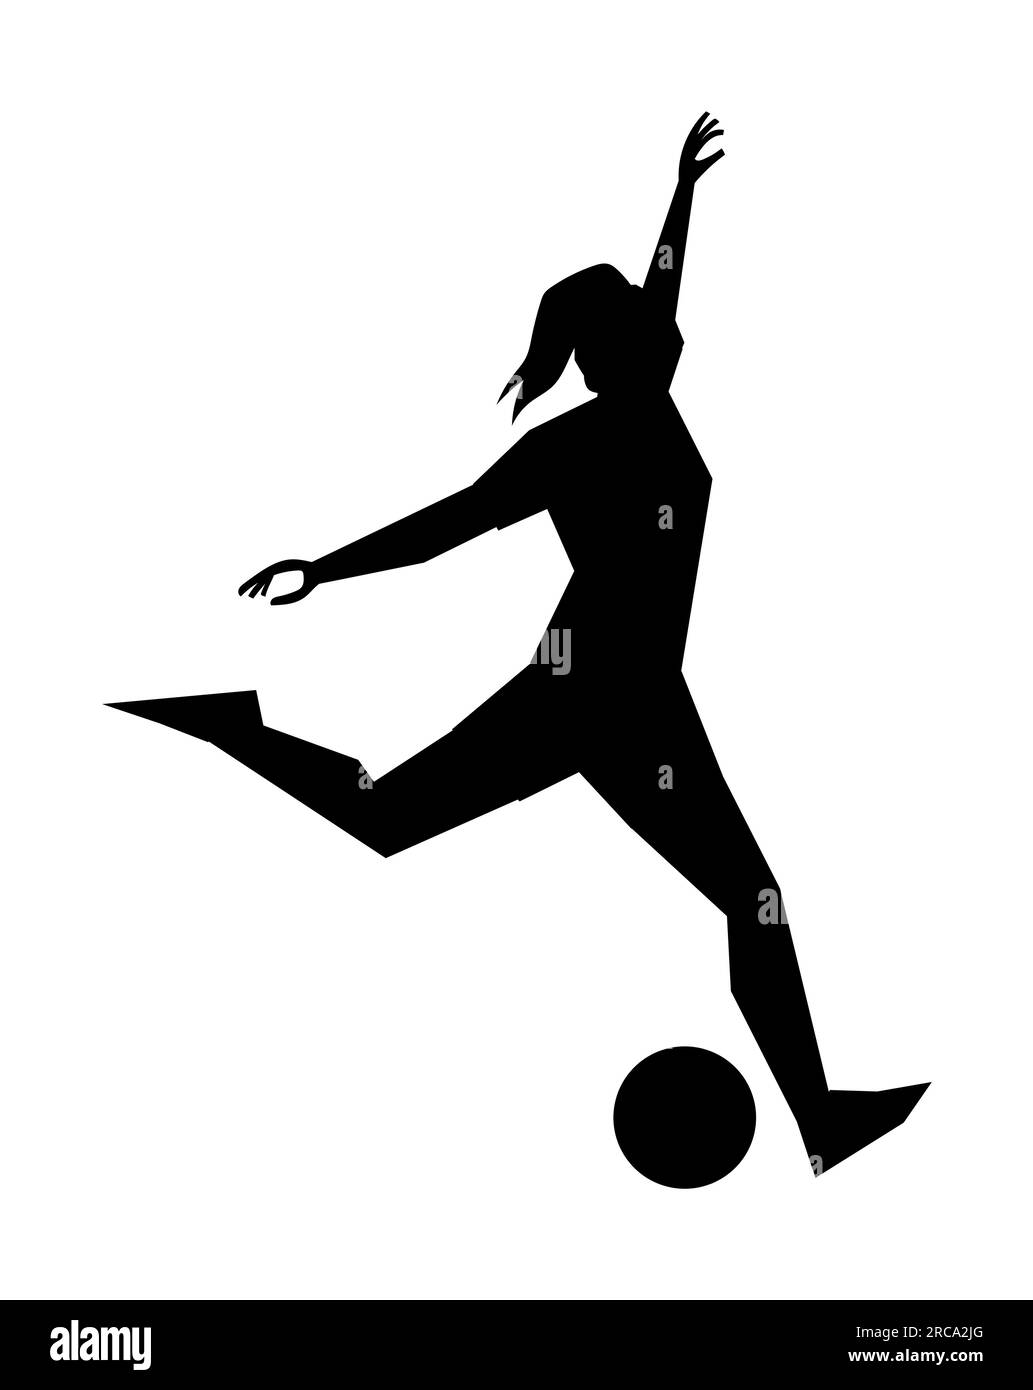 Black silhouette of woman kicking and playing football, female sports and game icon, vector illustration isolated on white background Stock Vector